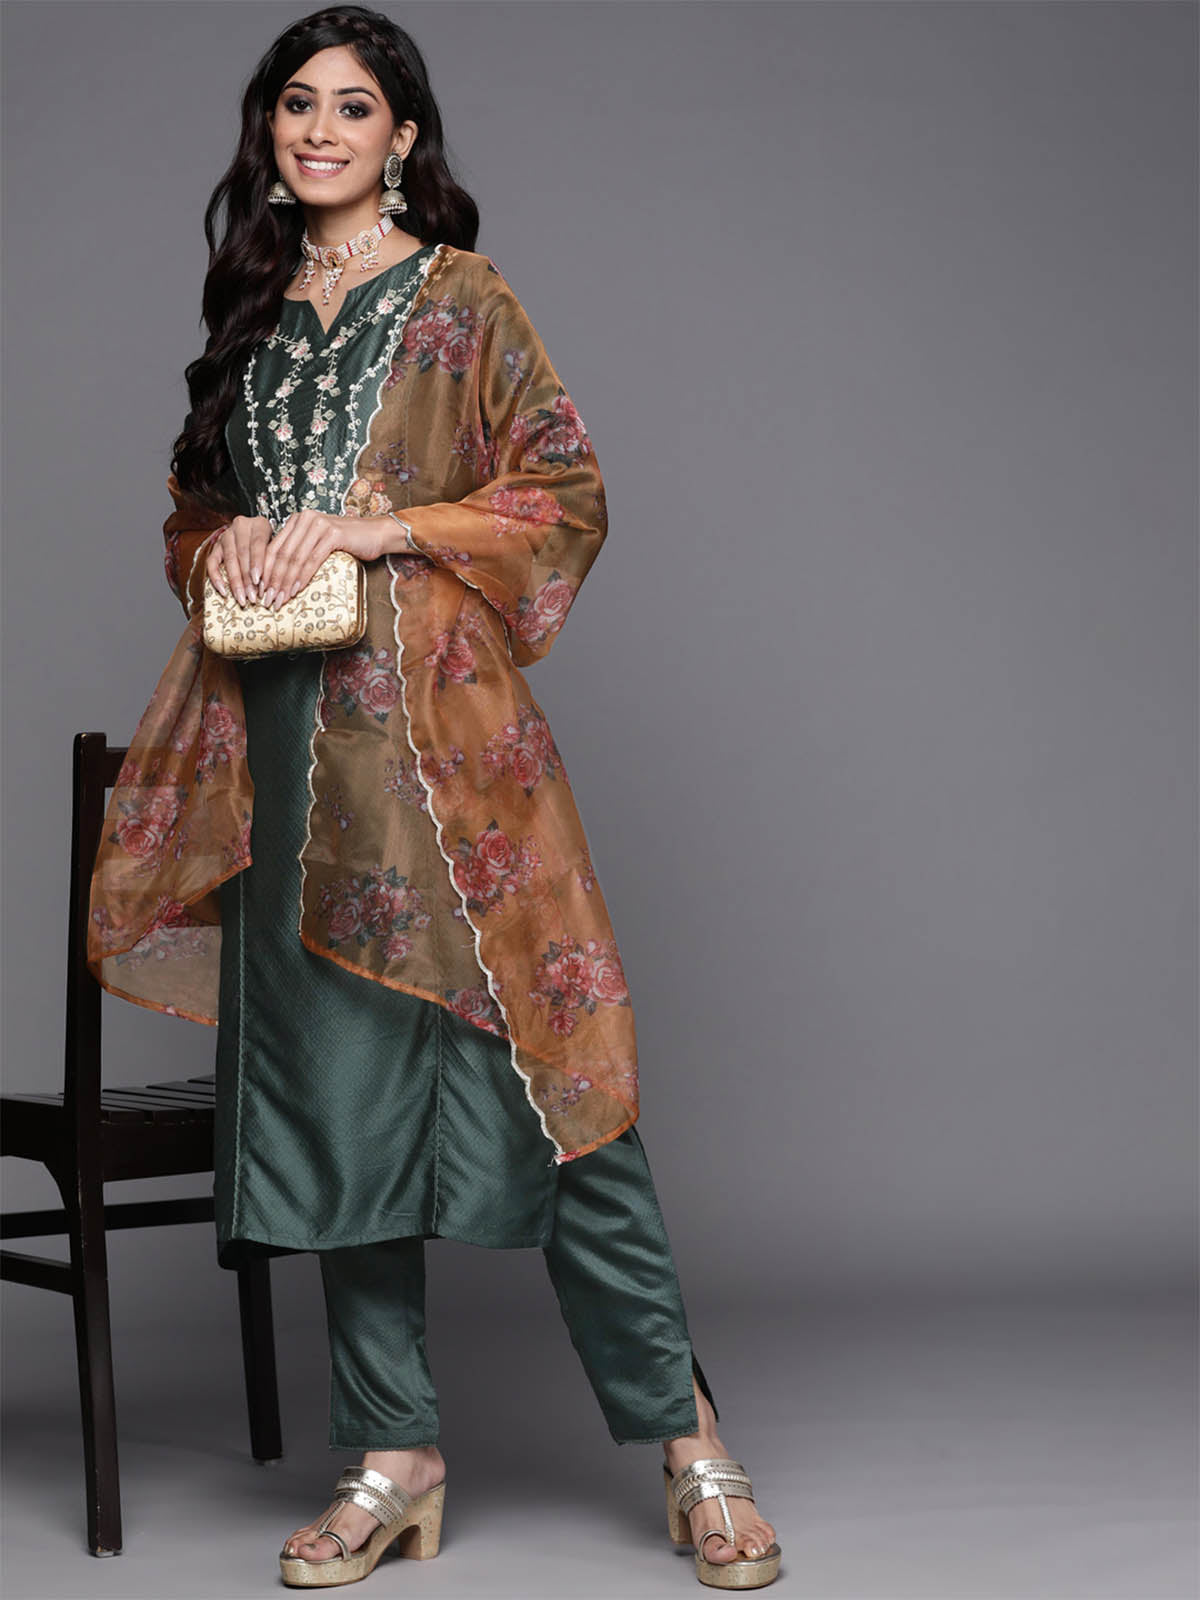 Women's Green Embroidered Straight Kurta Trousers With Dupatta Set - Odette